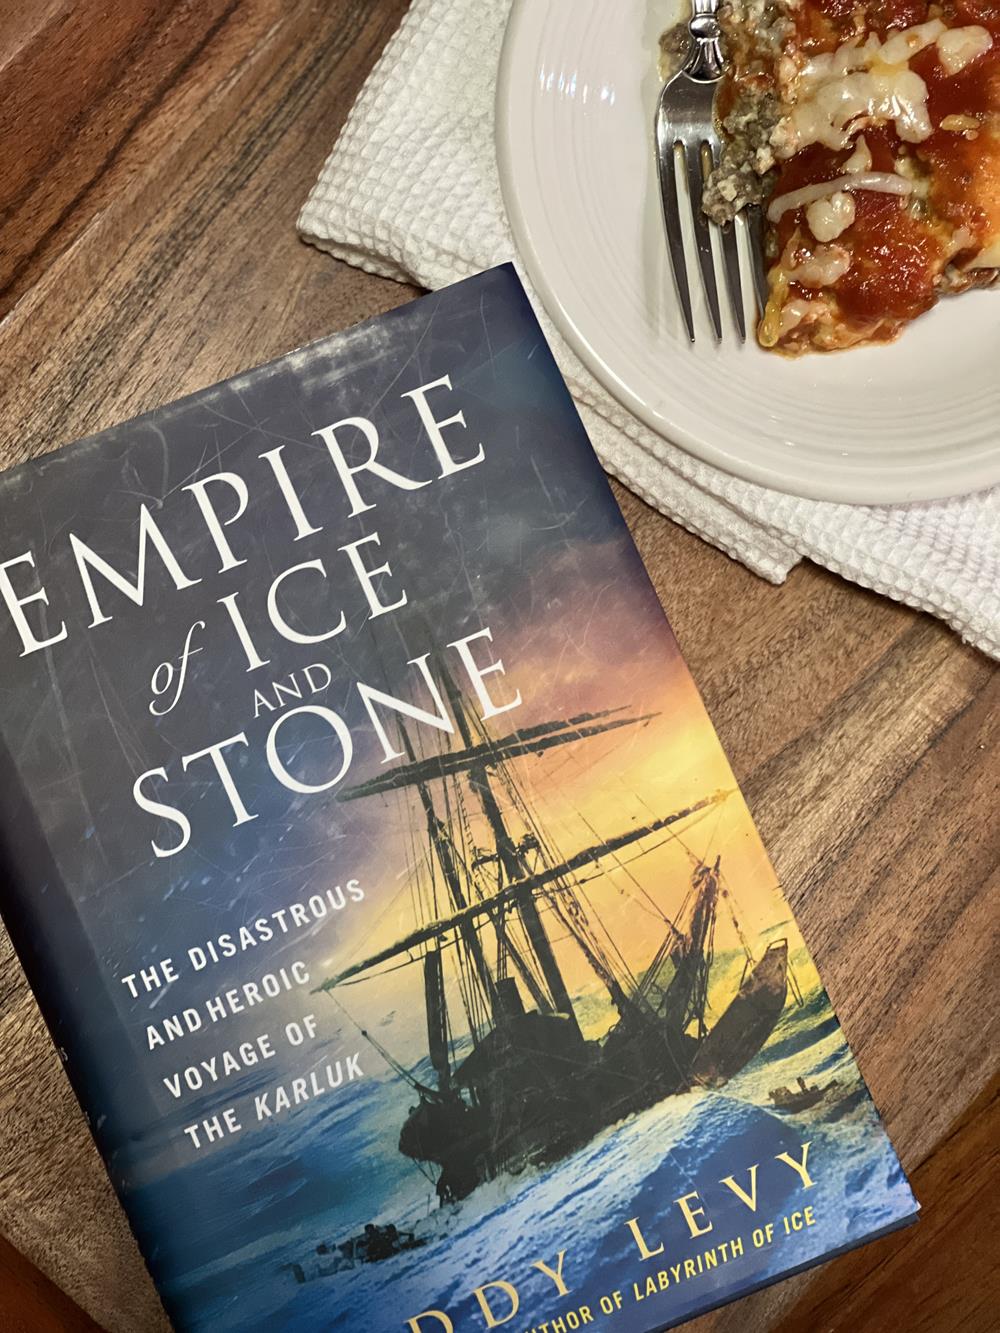 Empire and Stone Book and dinner on a plate